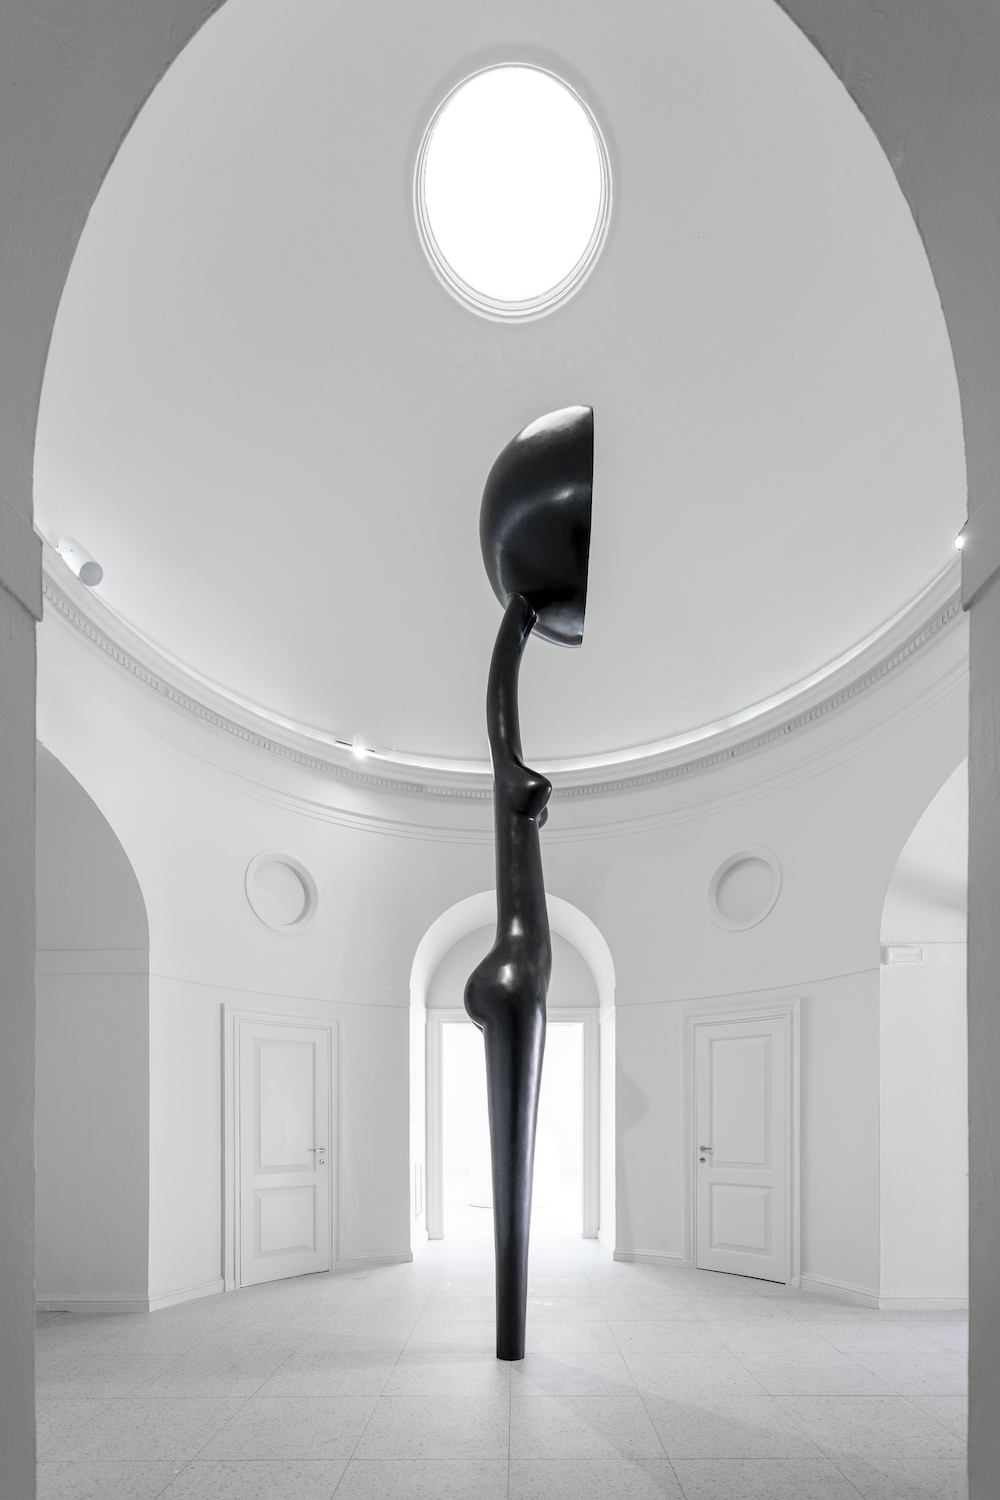 The side of a tall black bronze statue of an abstracted figure with a large head stands erect in a stark white room.